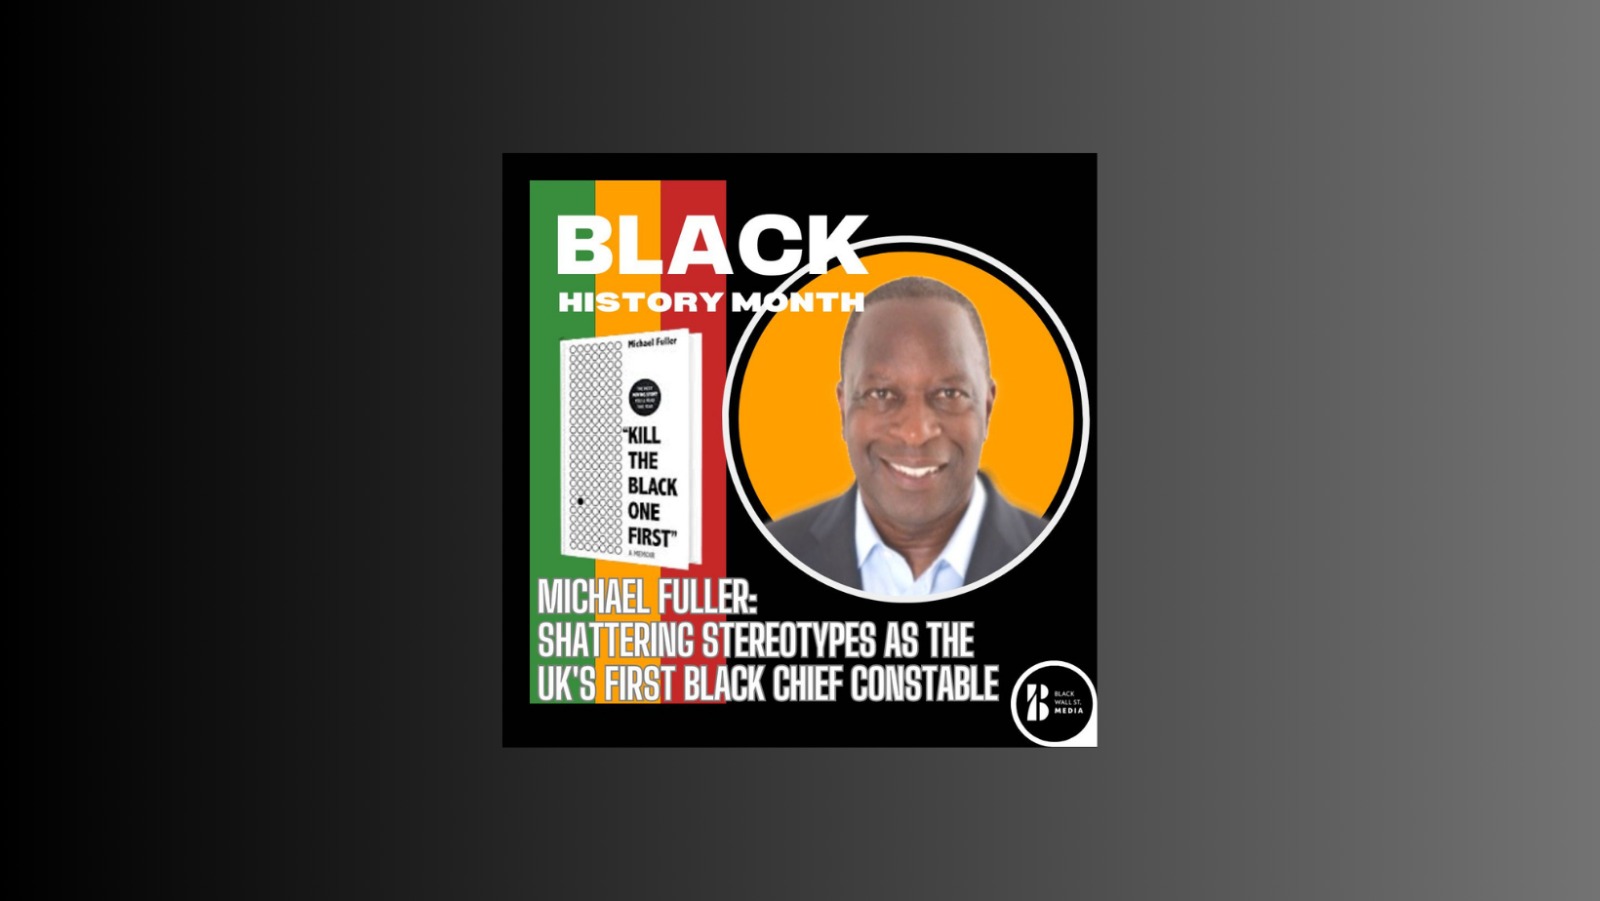 “Michael Fuller: The UK’s First Black Chief Constable”